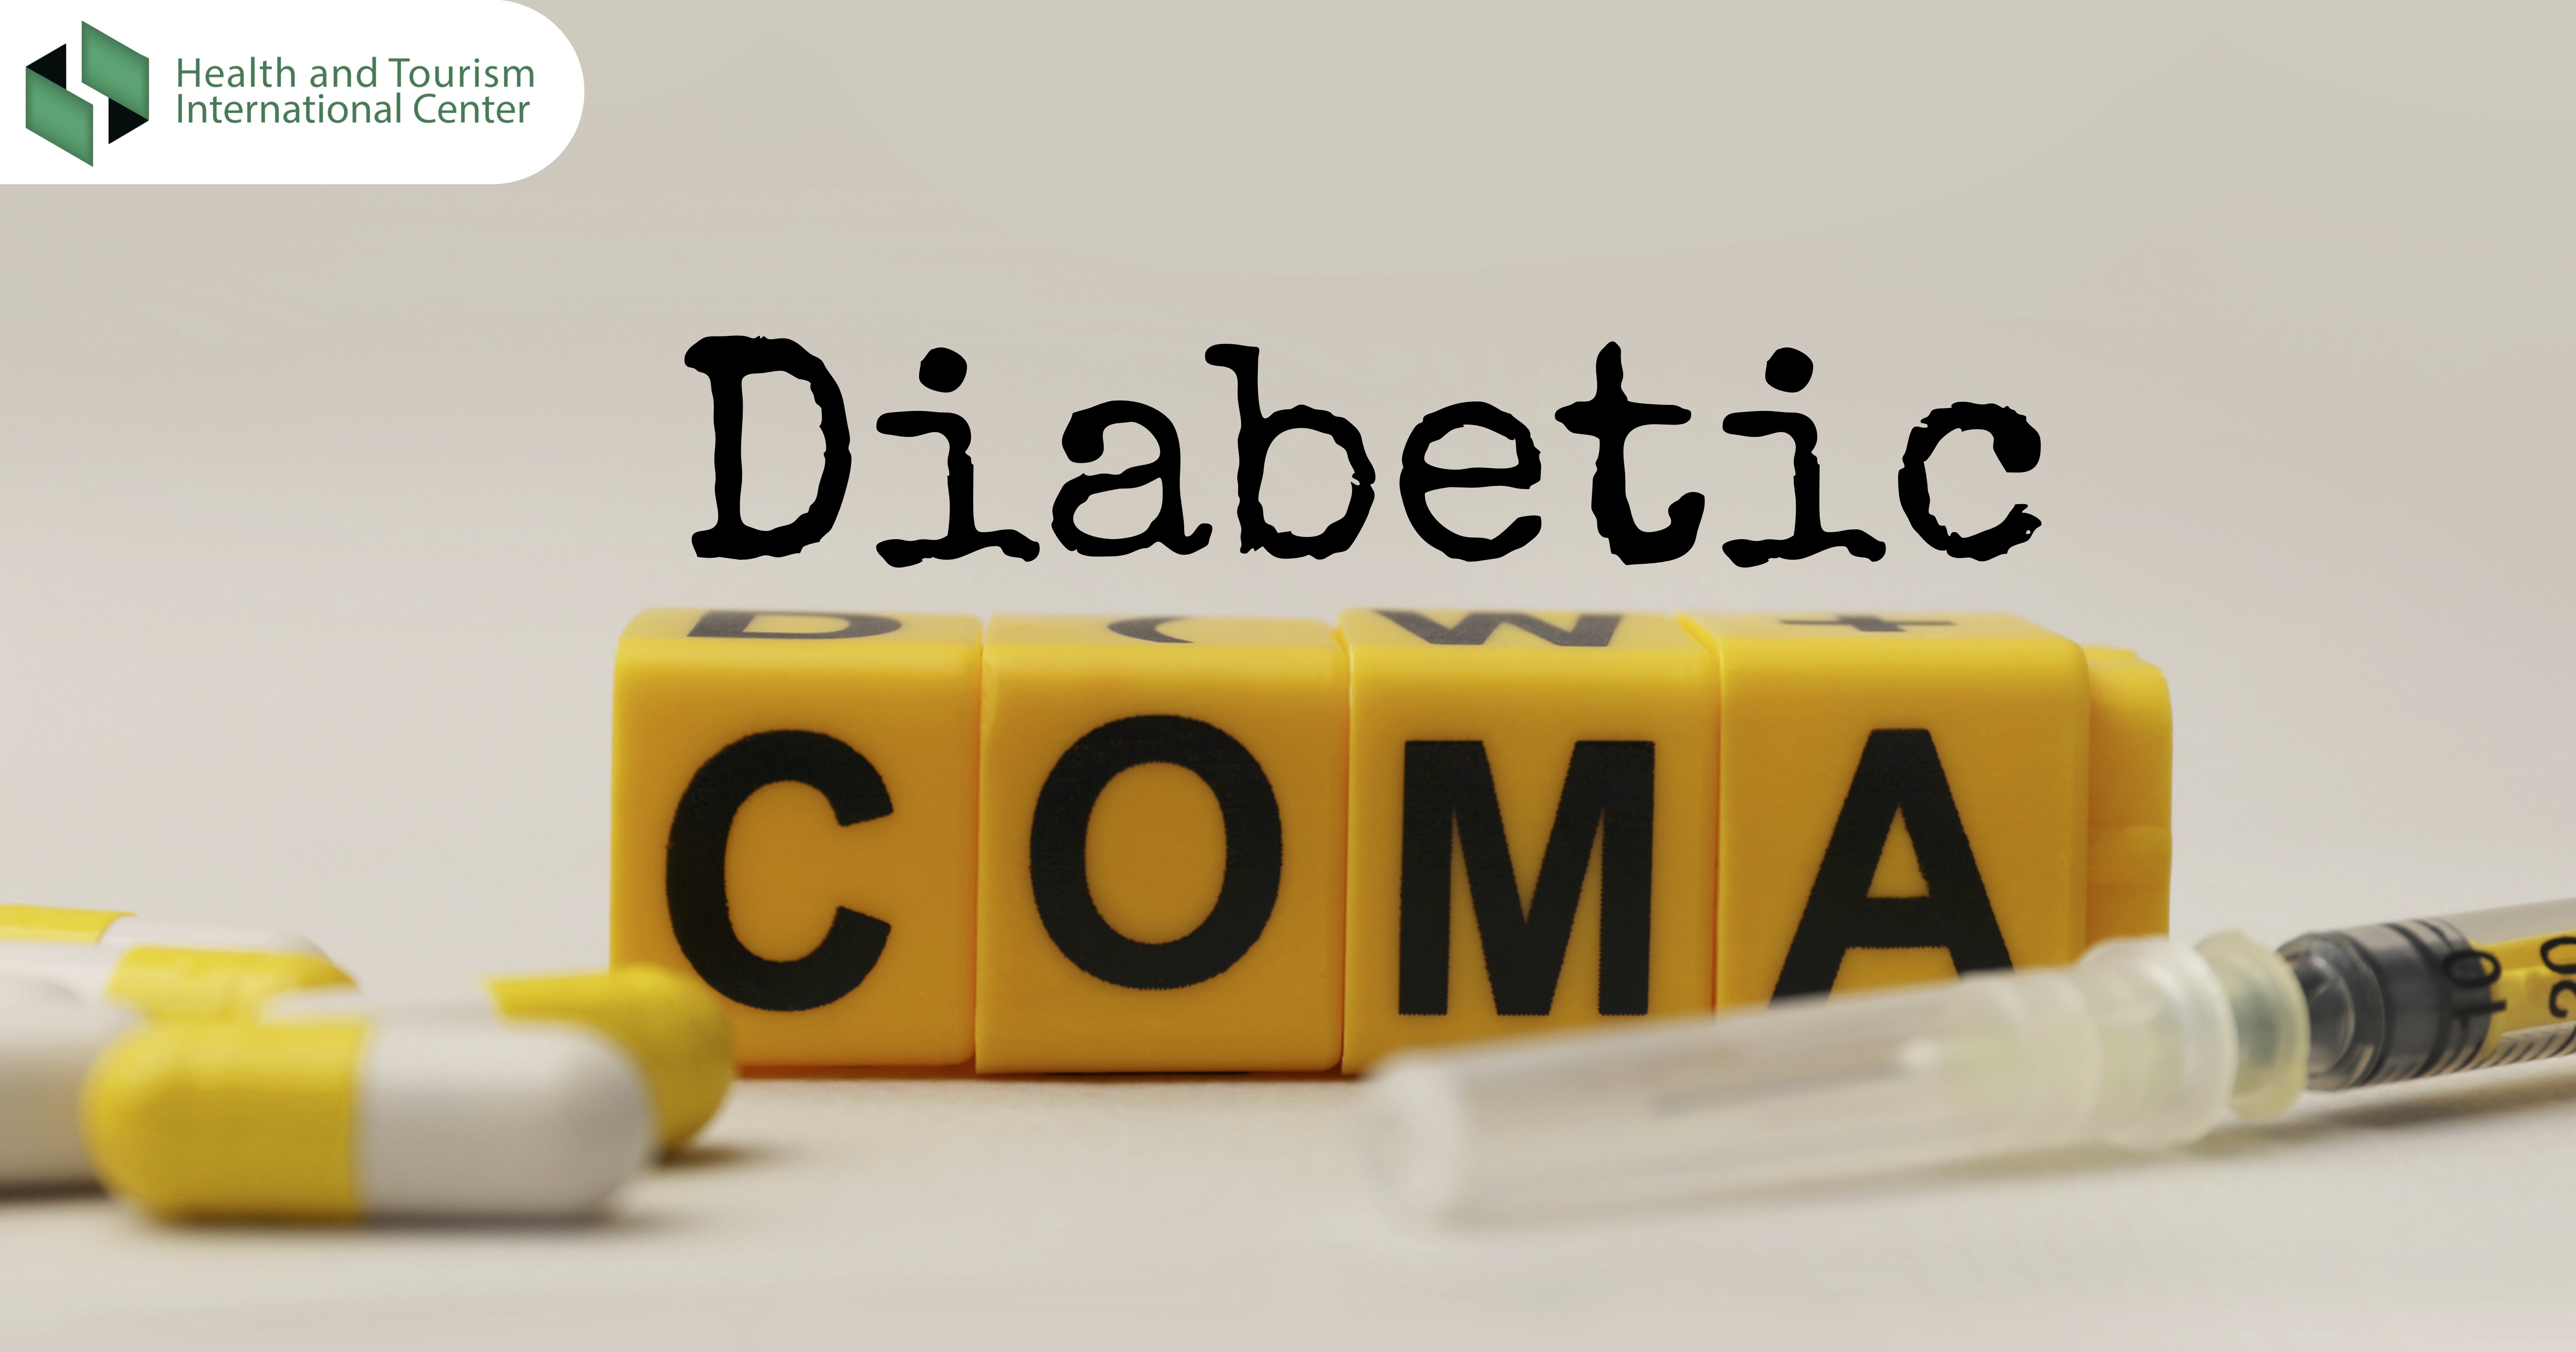 Diabetic coma - diagnosis and treatment methods